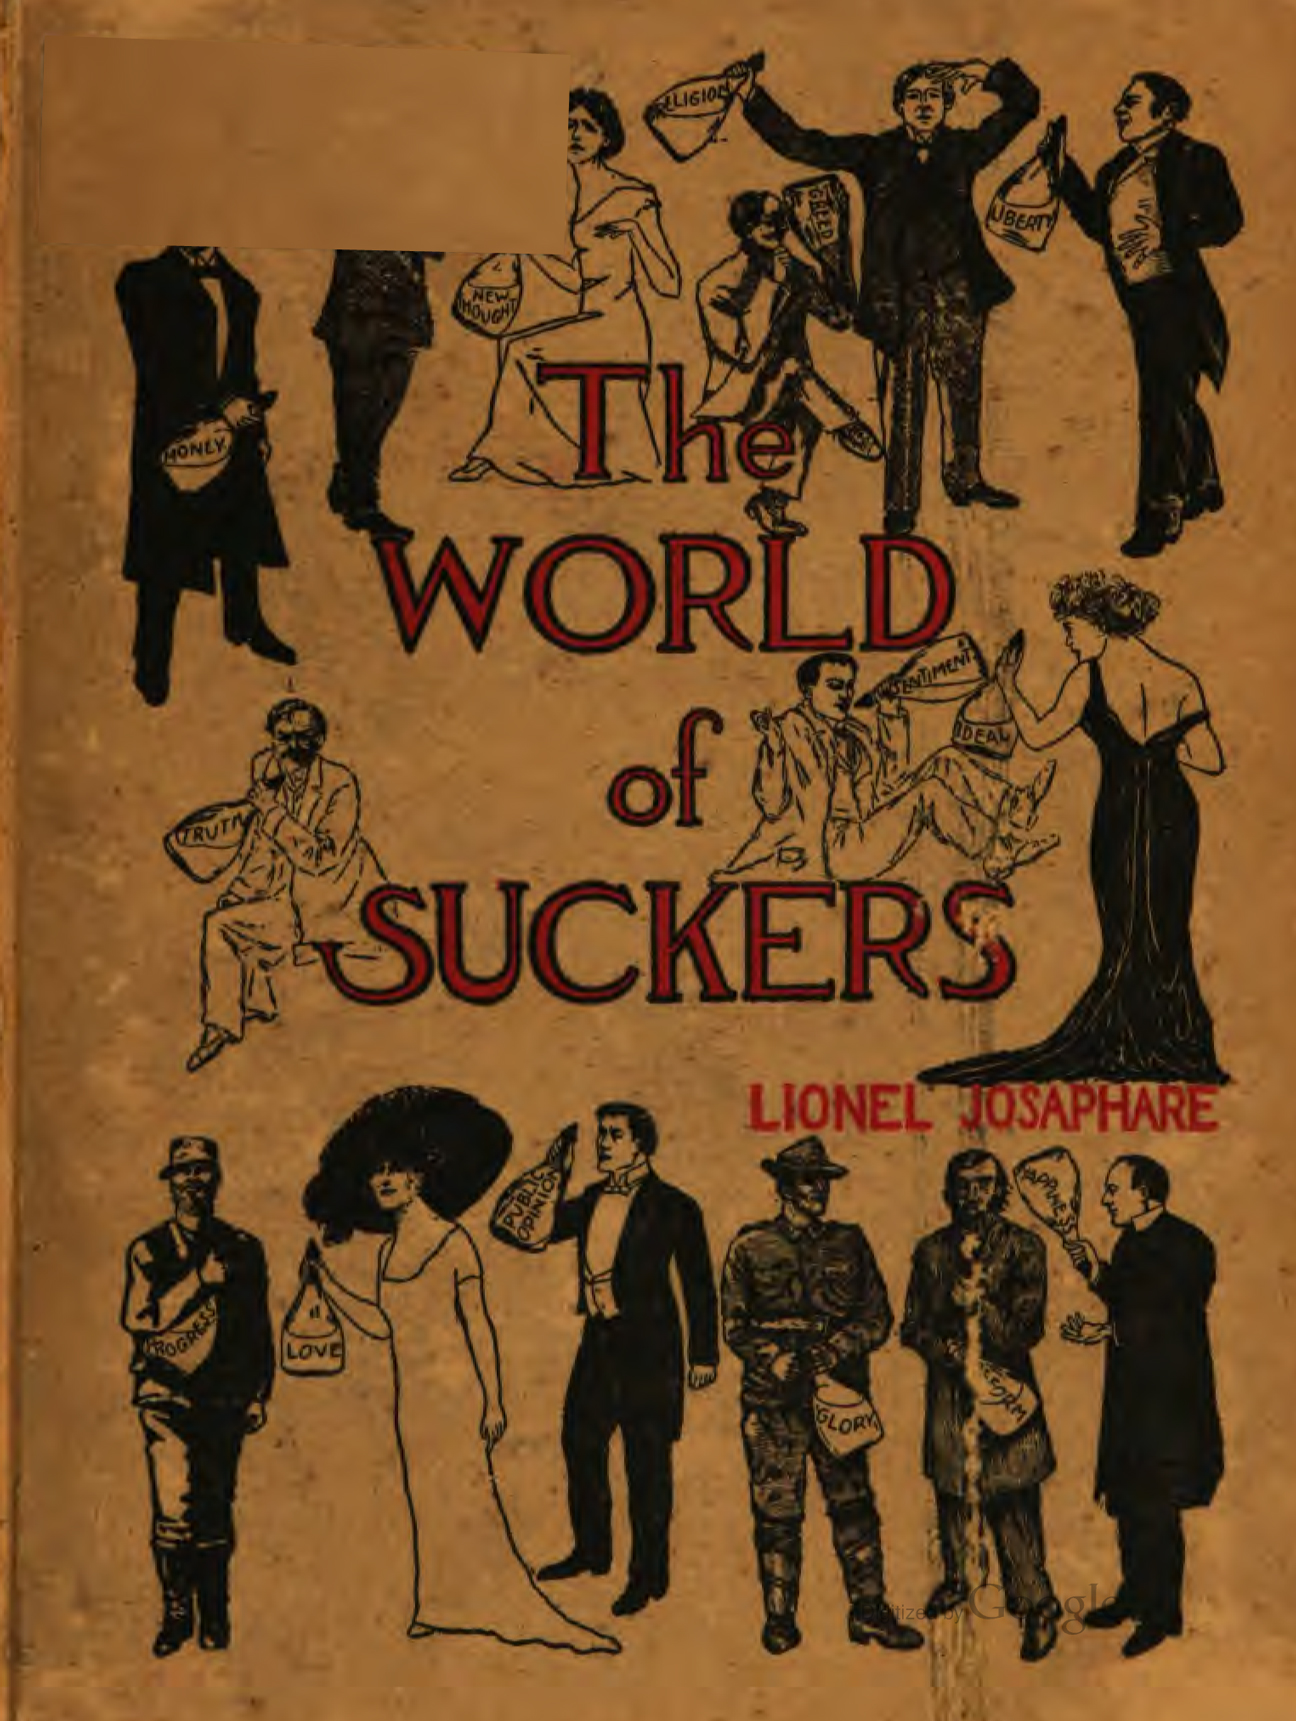 Cover of the World of Suckers by Lionel Josaphare (1909)